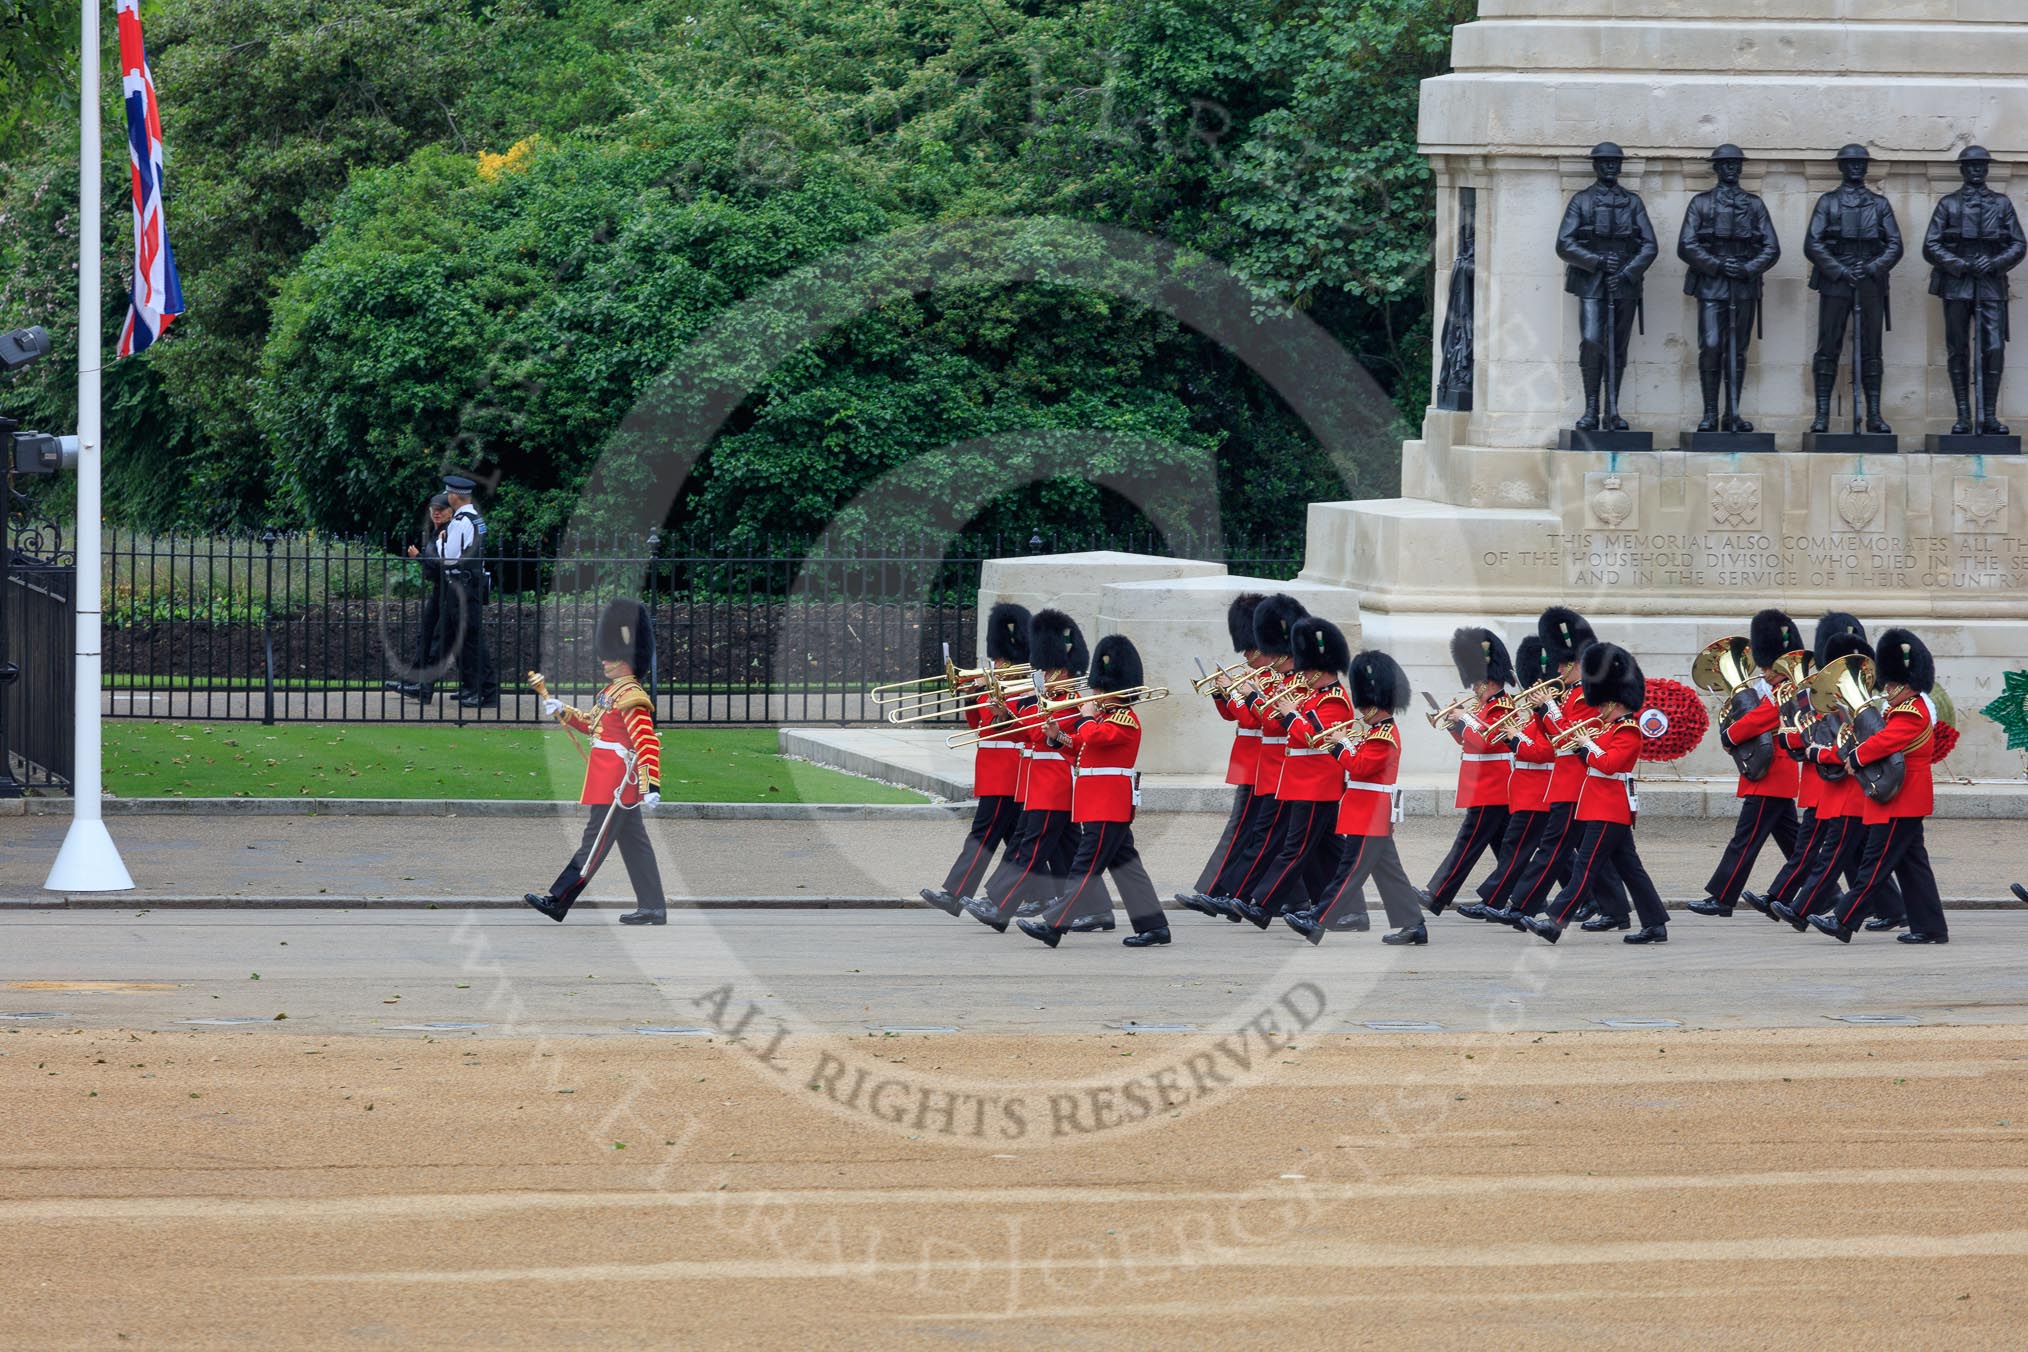 The Band of the Welsh Guards marching past the Guards Memorial during The Colonel's Review 2018 (final rehearsal for Trooping the Colour, The Queen's Birthday Parade)  at Horse Guards Parade, Westminster, London, 2 June 2018, 10:13.